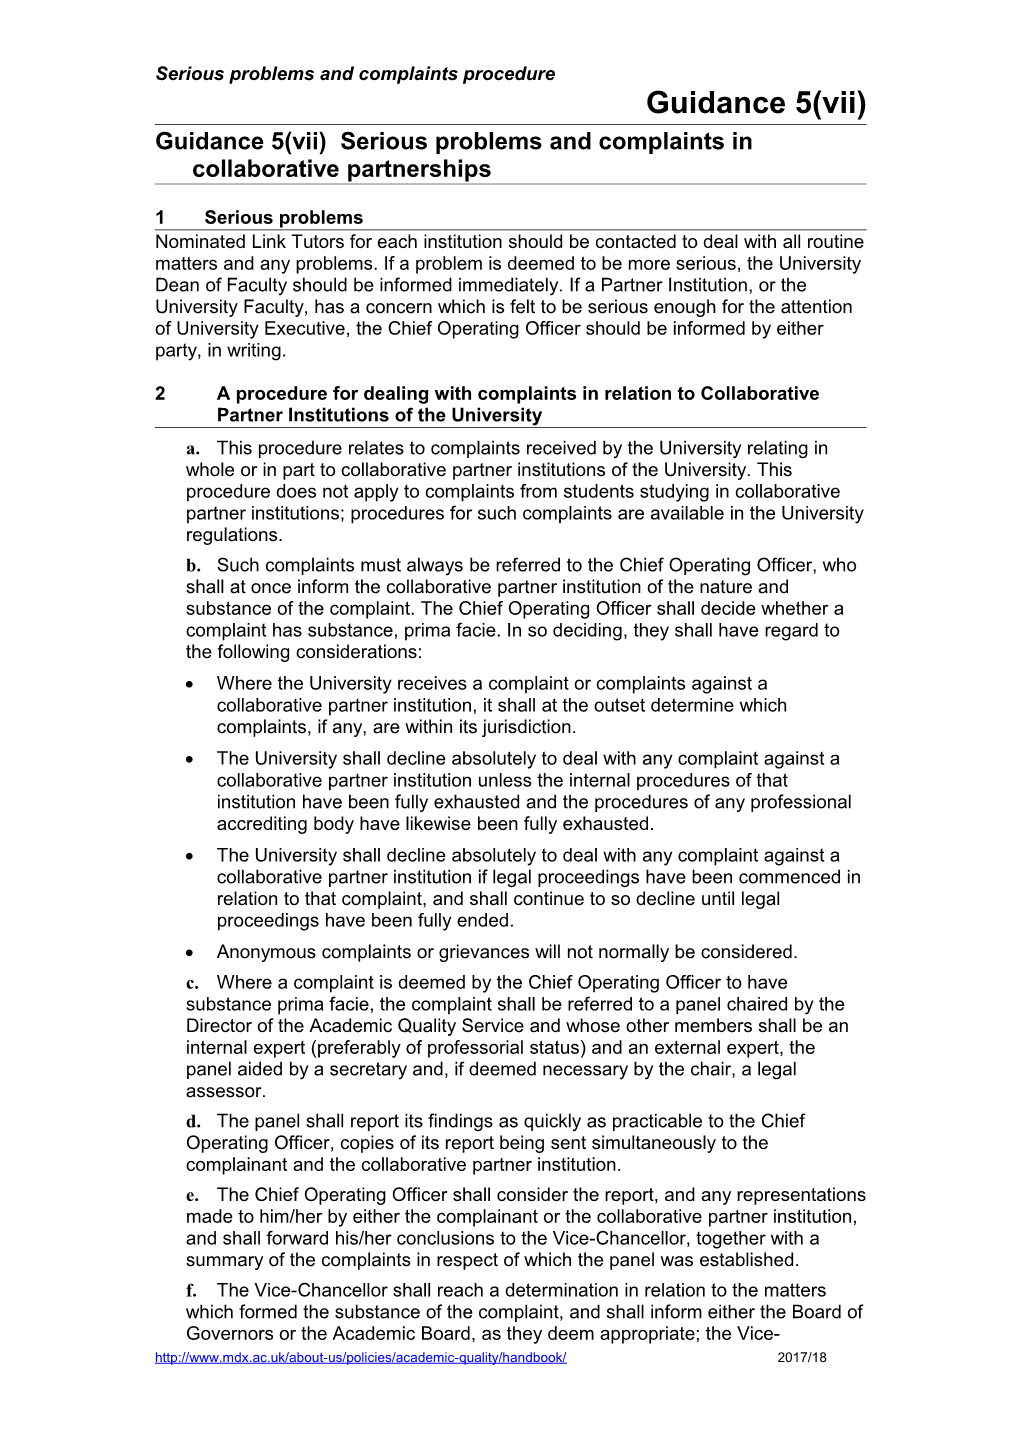 Guidance 5(Vii)Serious Problems and Complaints in Collaborative Partnerships